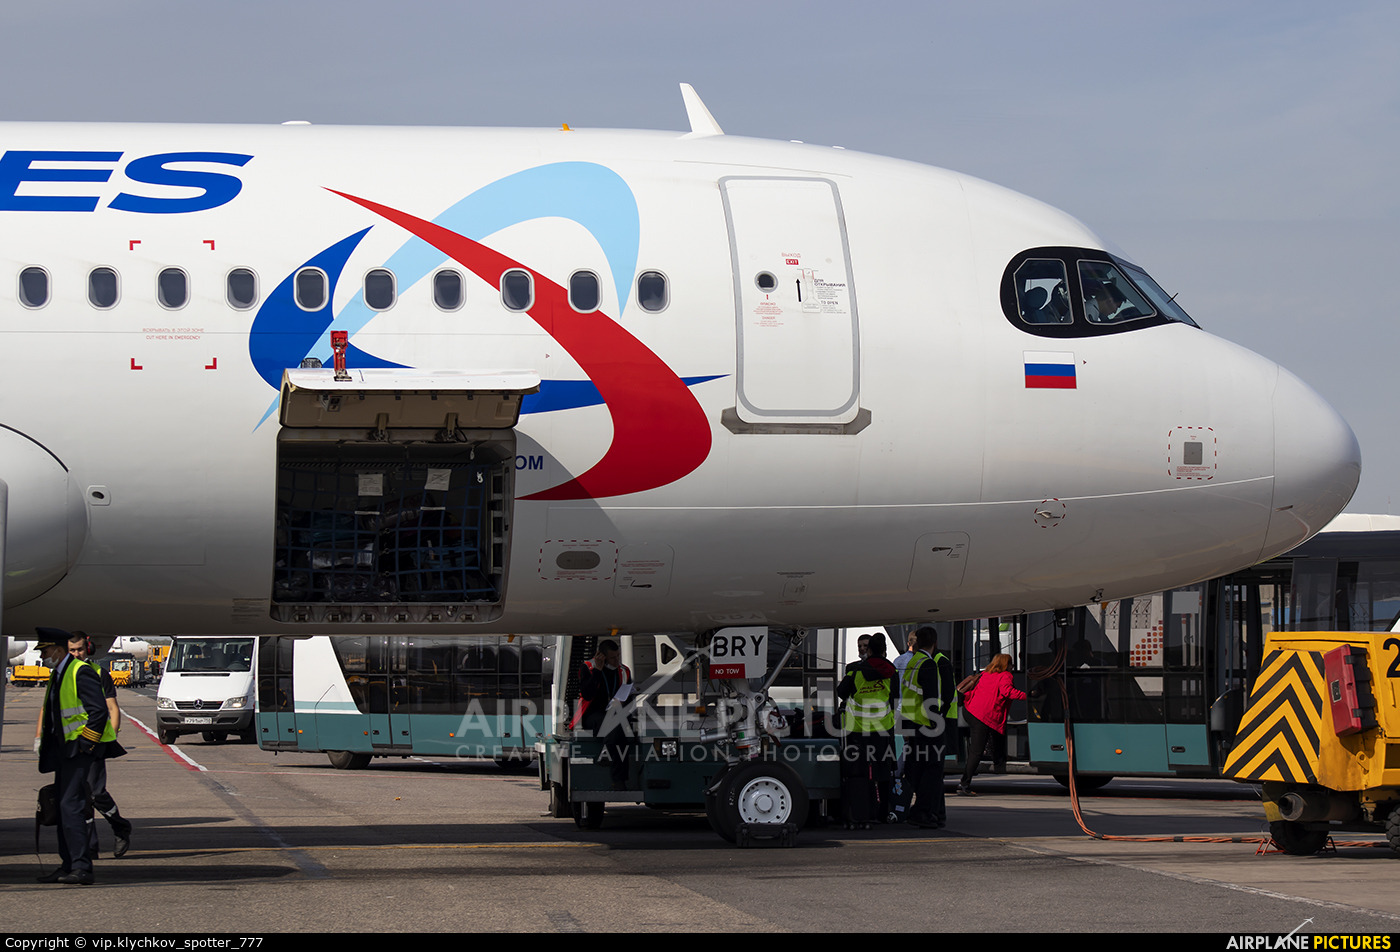 Ural Airlines VP-BRY aircraft at Moscow - Domodedovo